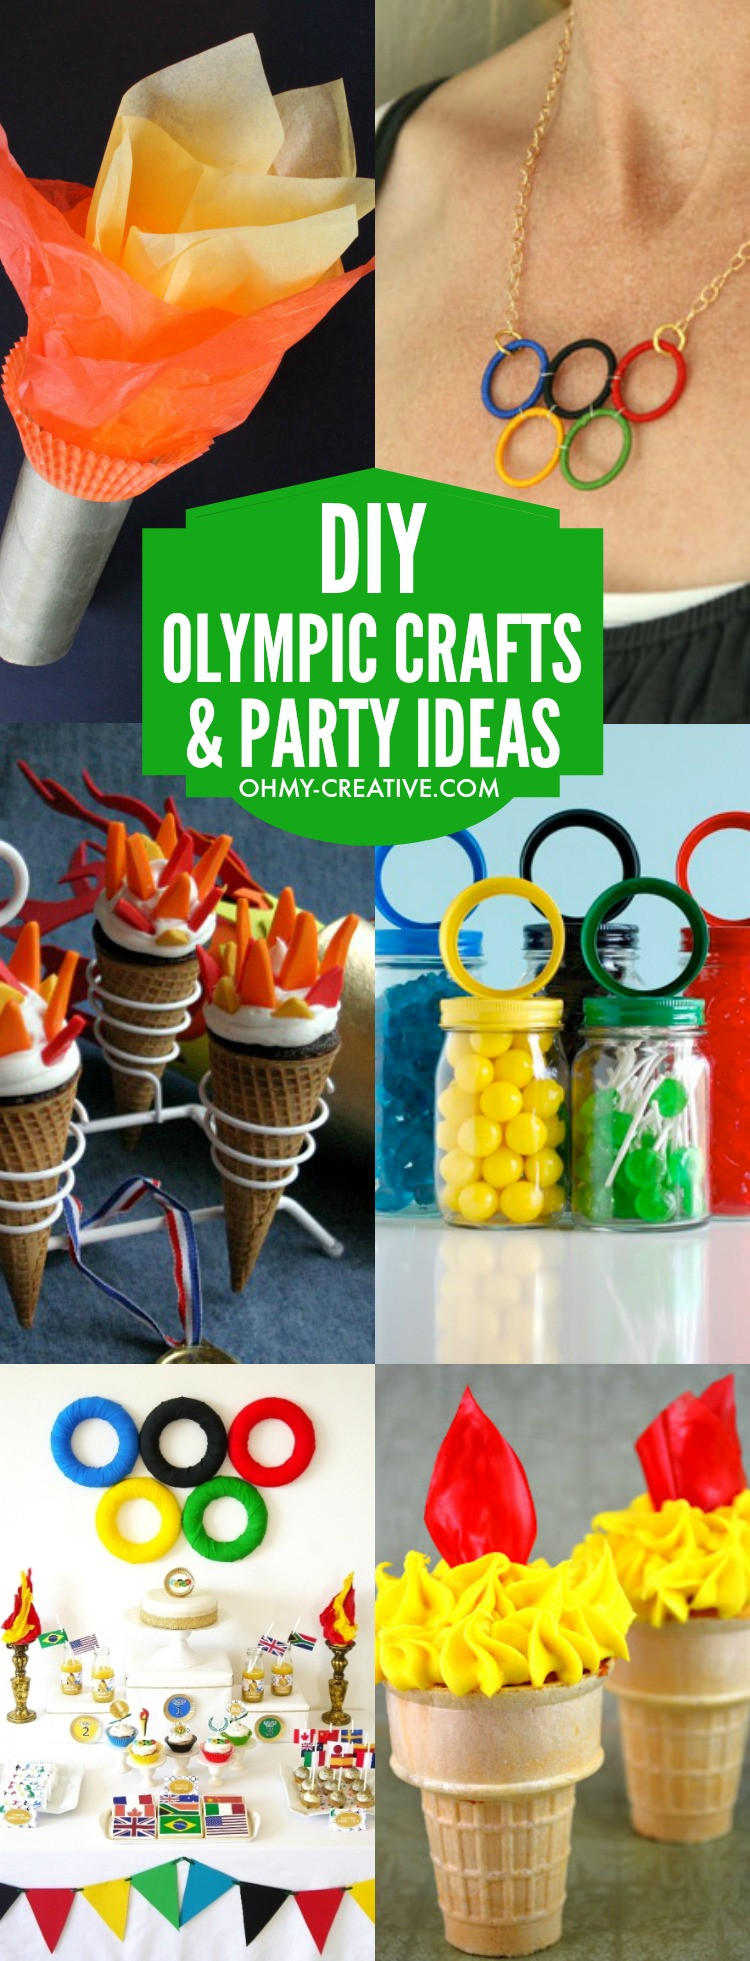 Summer In Winter Party Ideas
 DIY Olympic Crafts And Party Ideas Oh My Creative